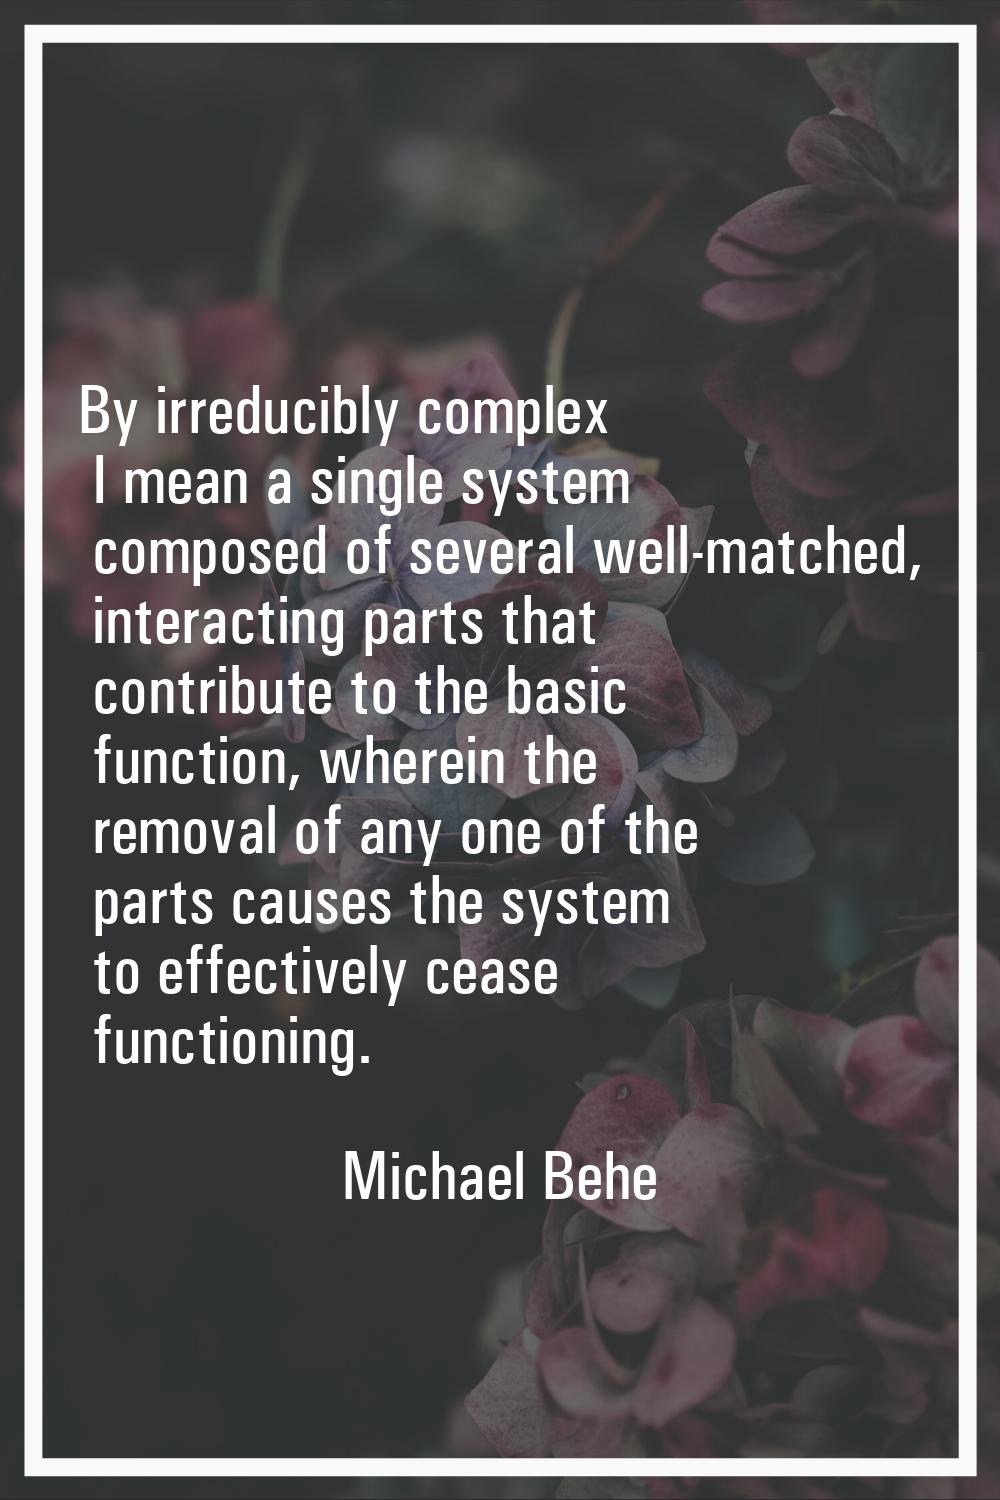 By irreducibly complex I mean a single system composed of several well-matched, interacting parts t